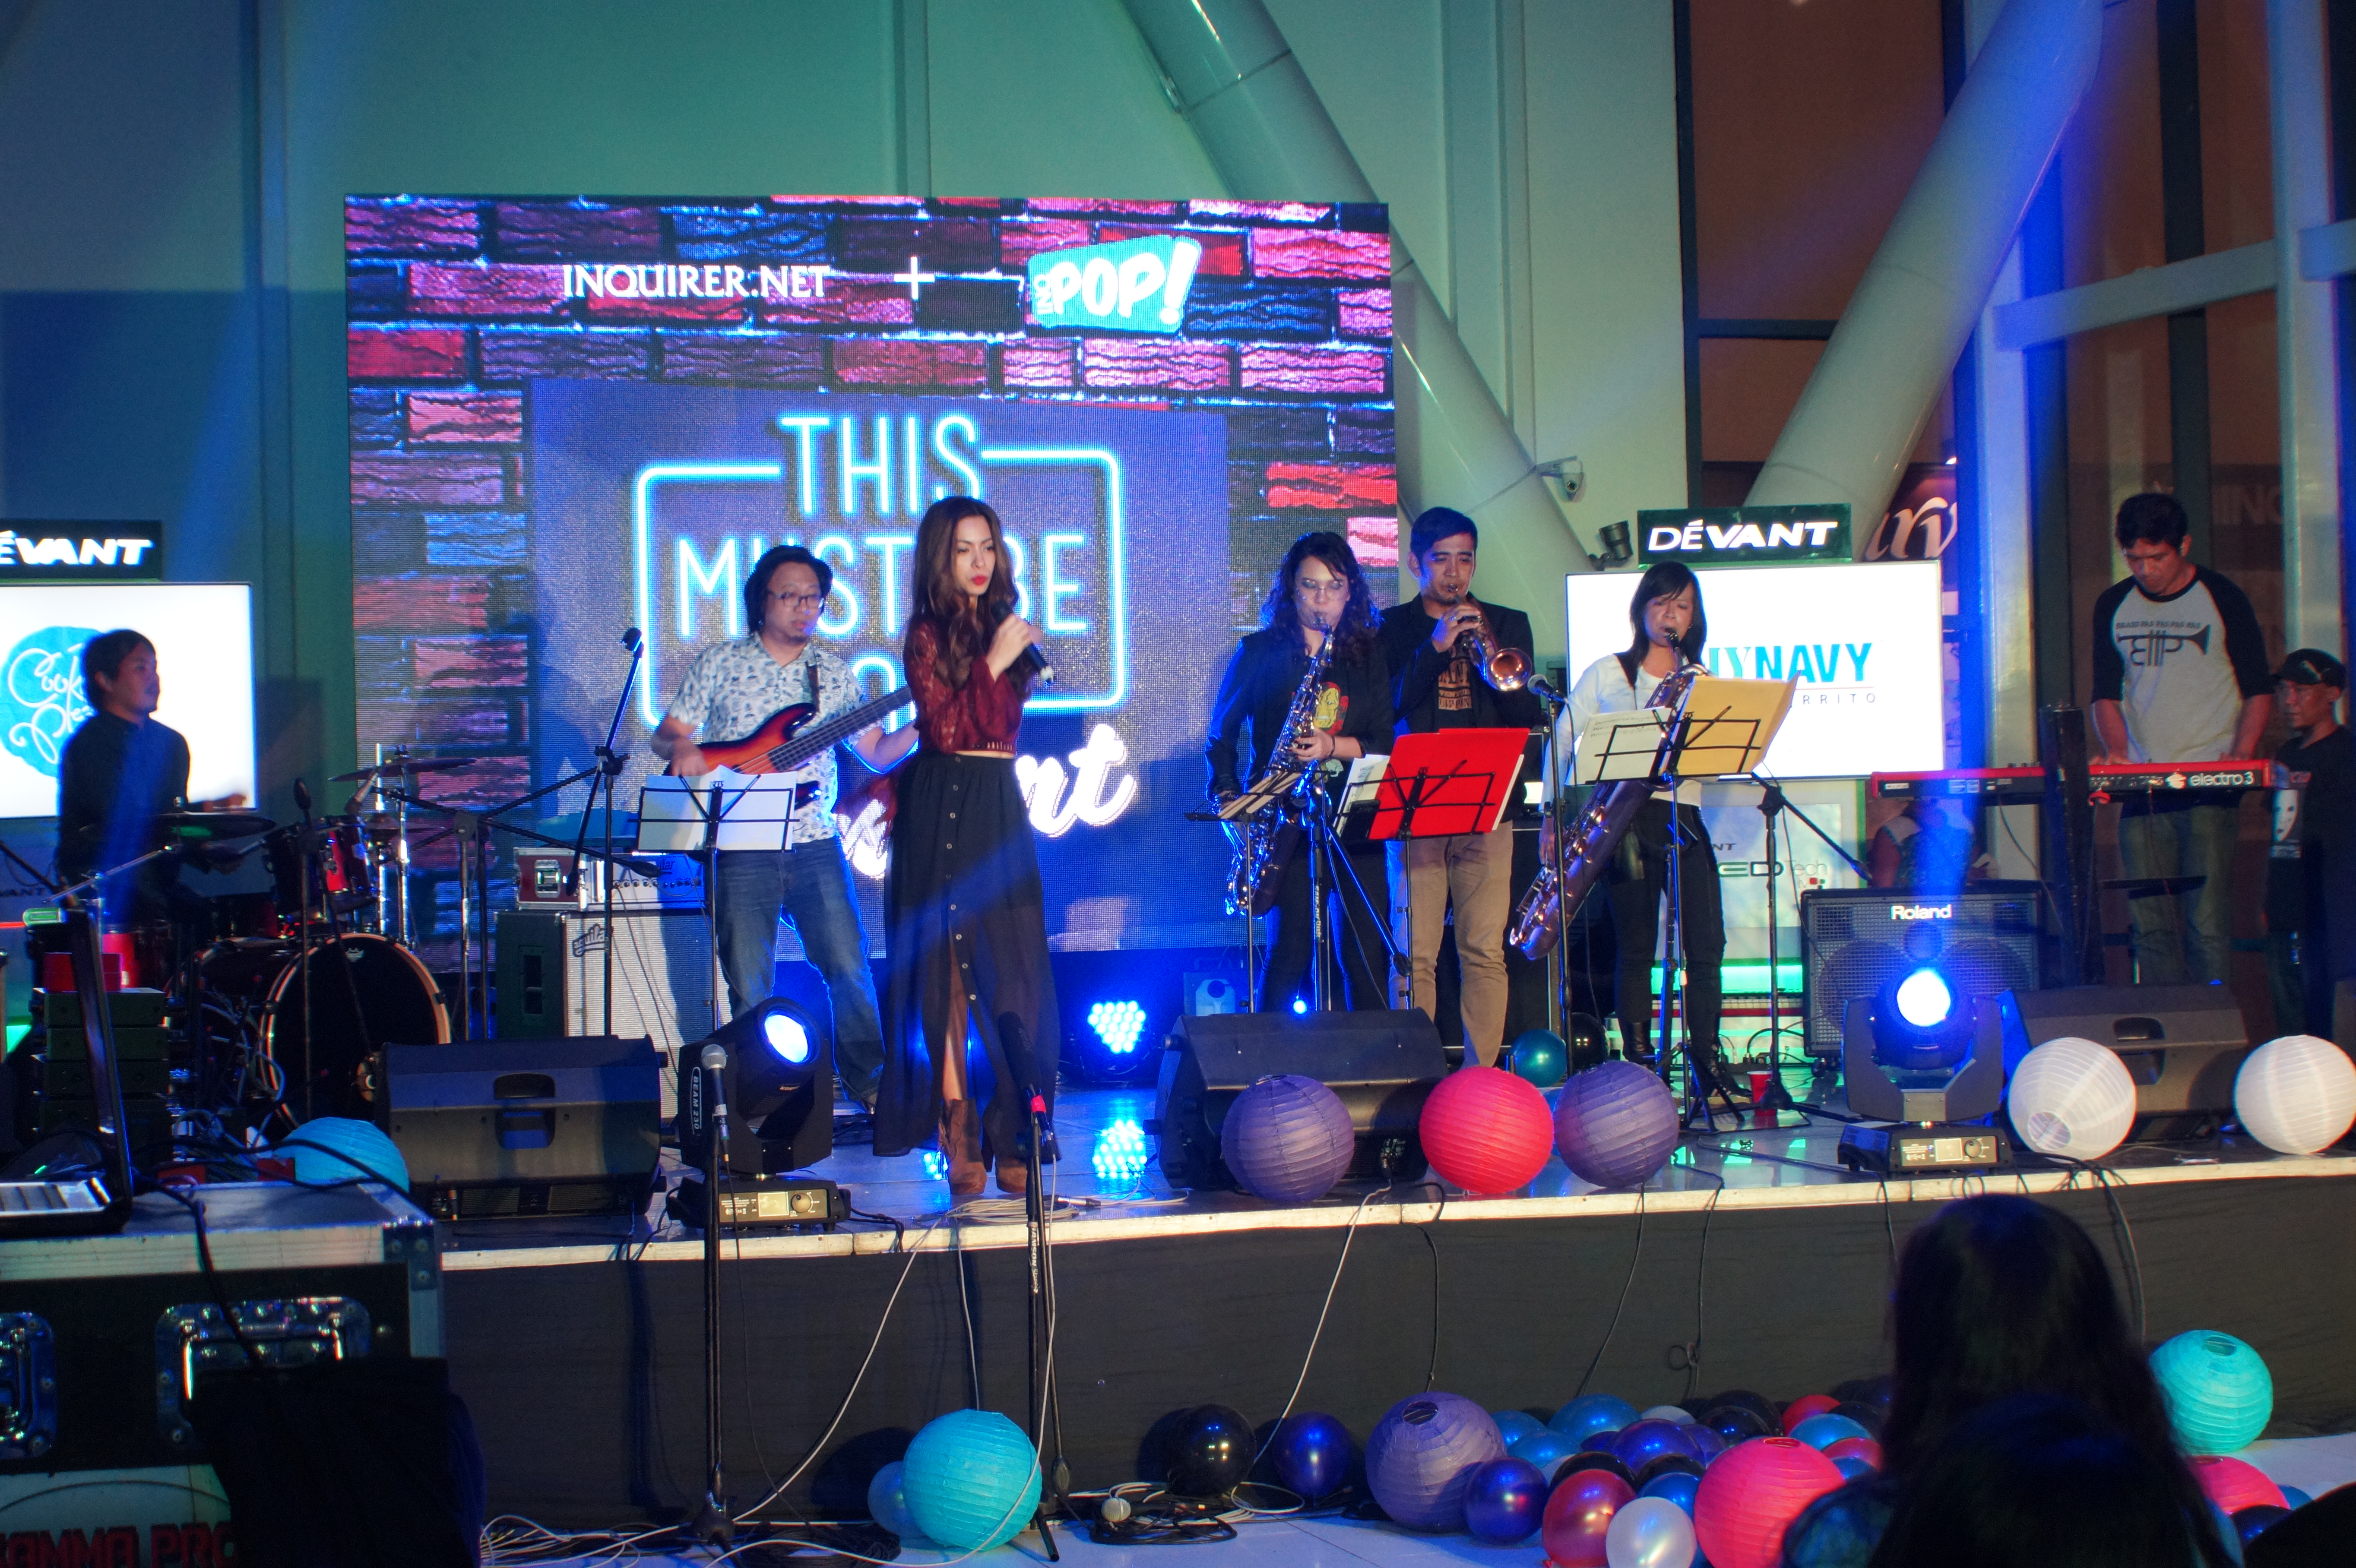 INQUIRER.net’s quirky little cousin, InqPOP!, officially launches with “This Must Be POP!” Concert